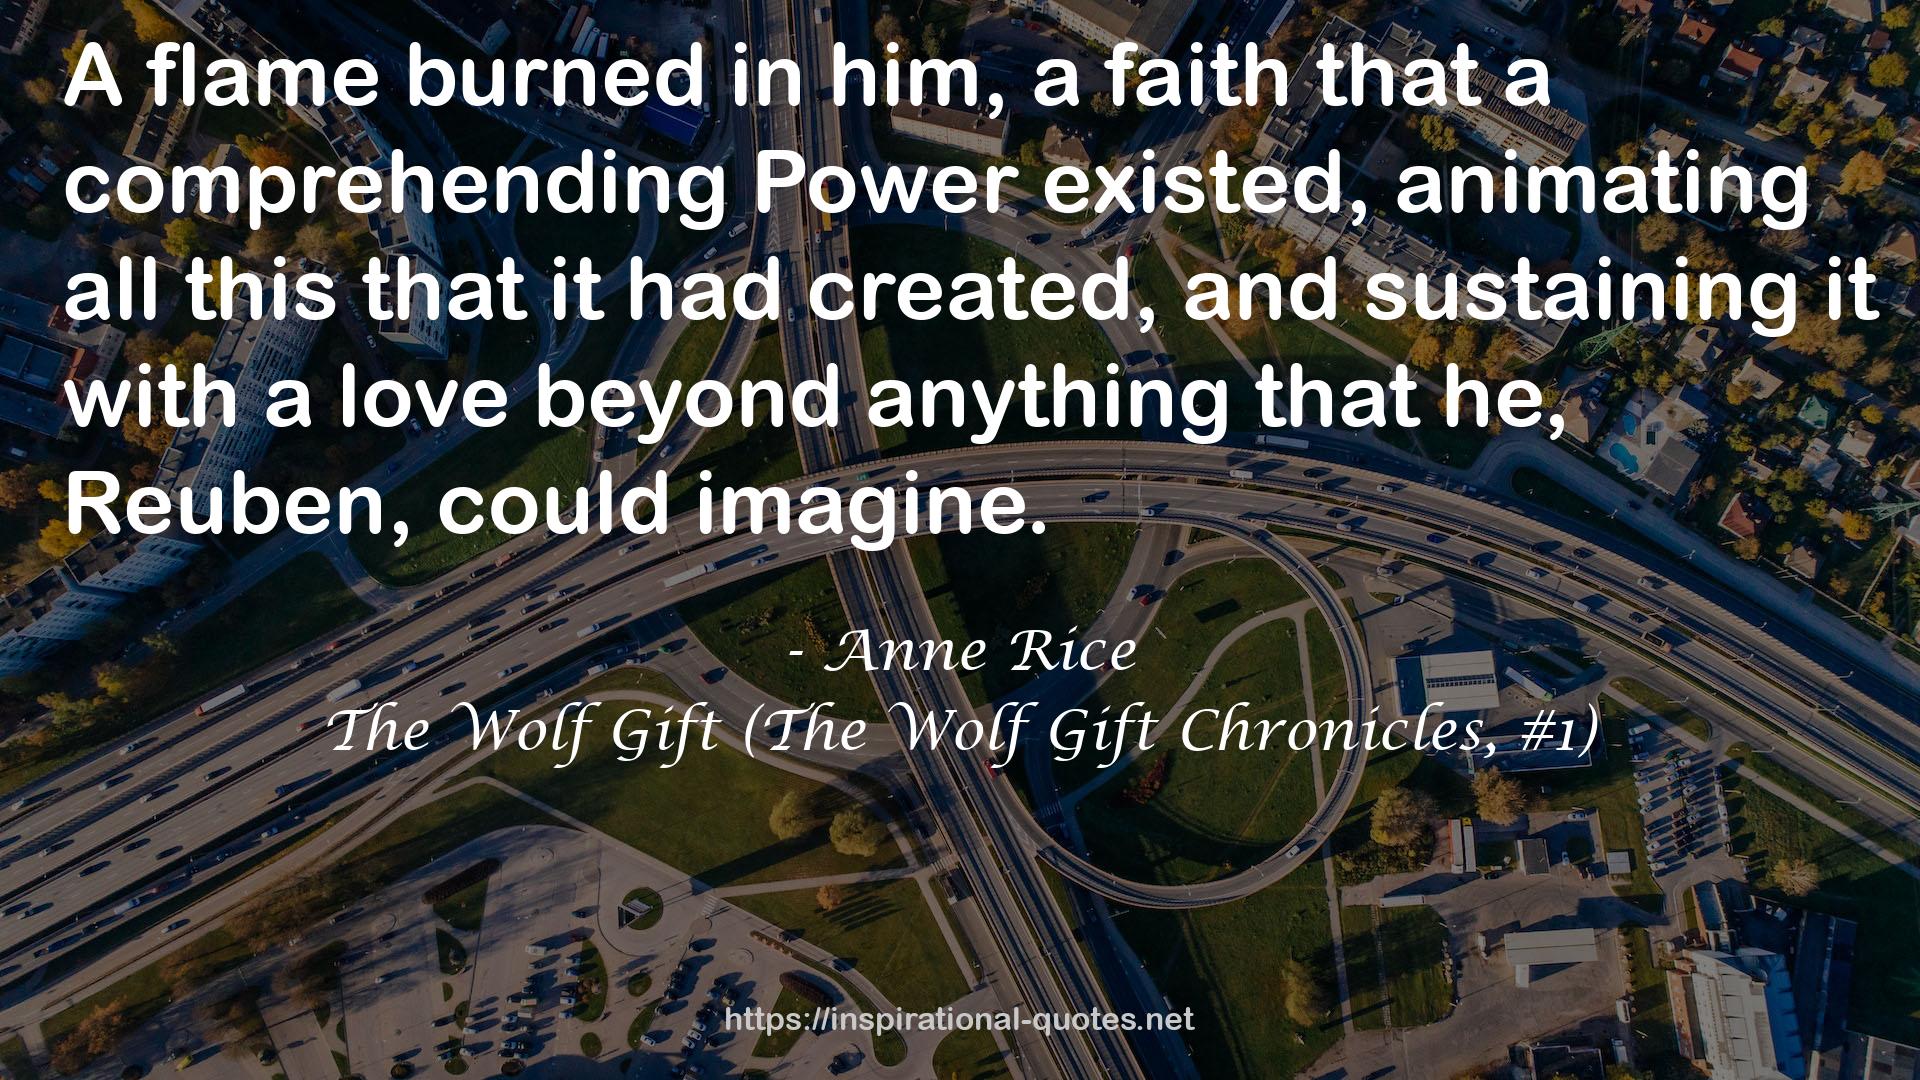 The Wolf Gift (The Wolf Gift Chronicles, #1) QUOTES